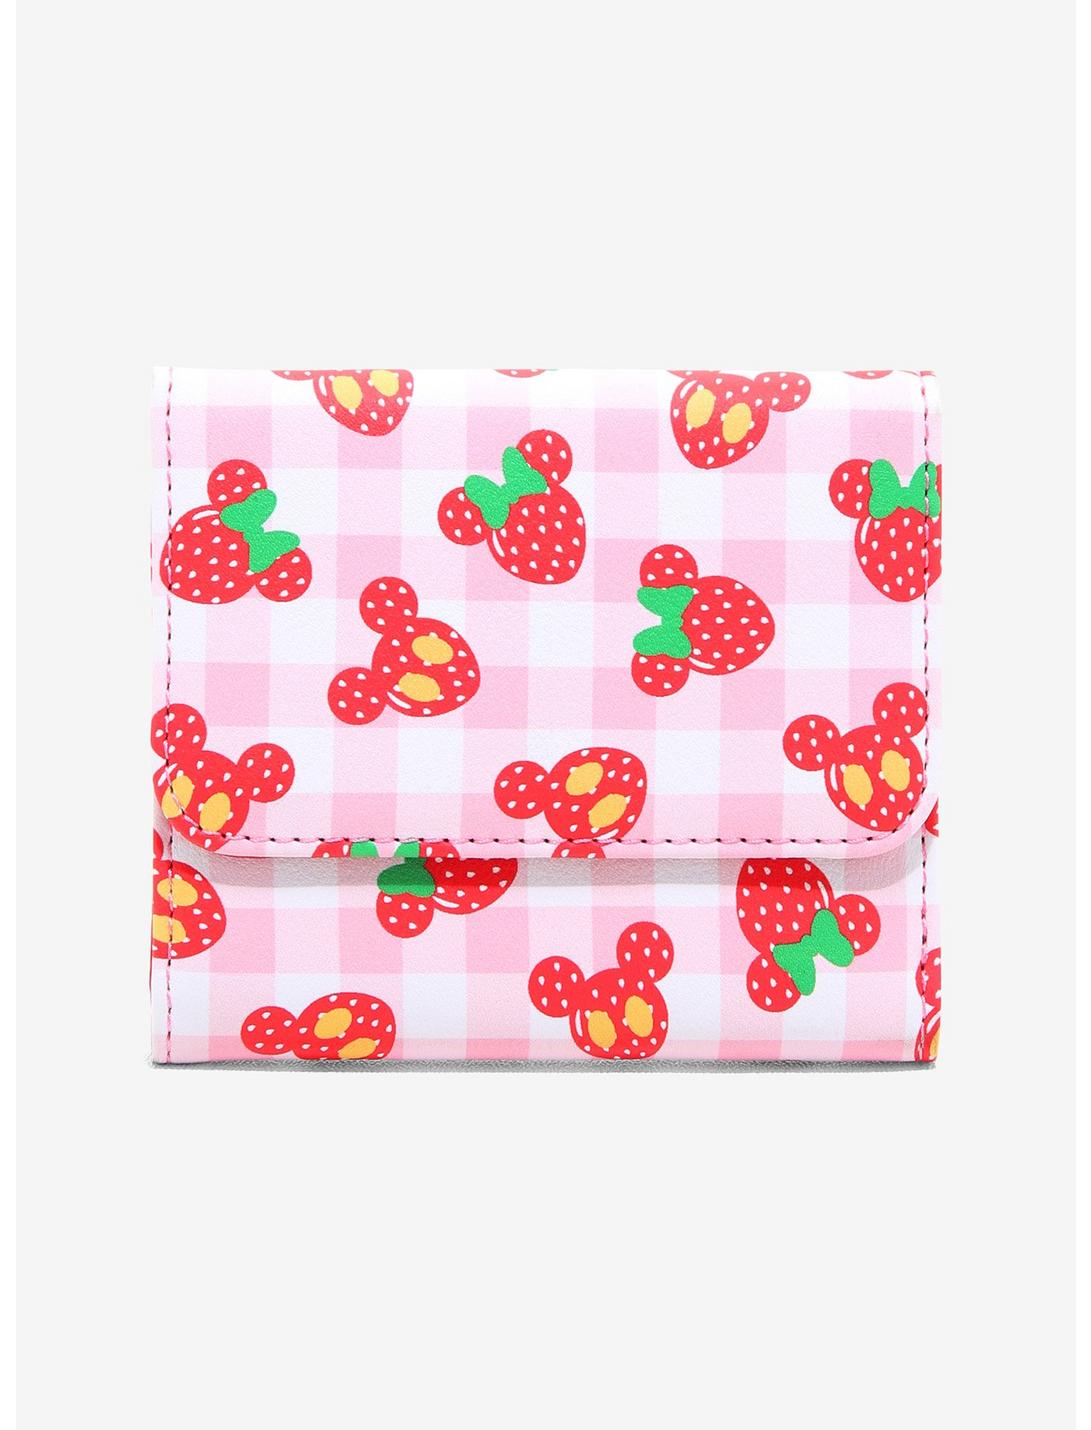 Loungefly Disney Minnie Mouse Strawberry Mini Flap Wallet, , hi-res